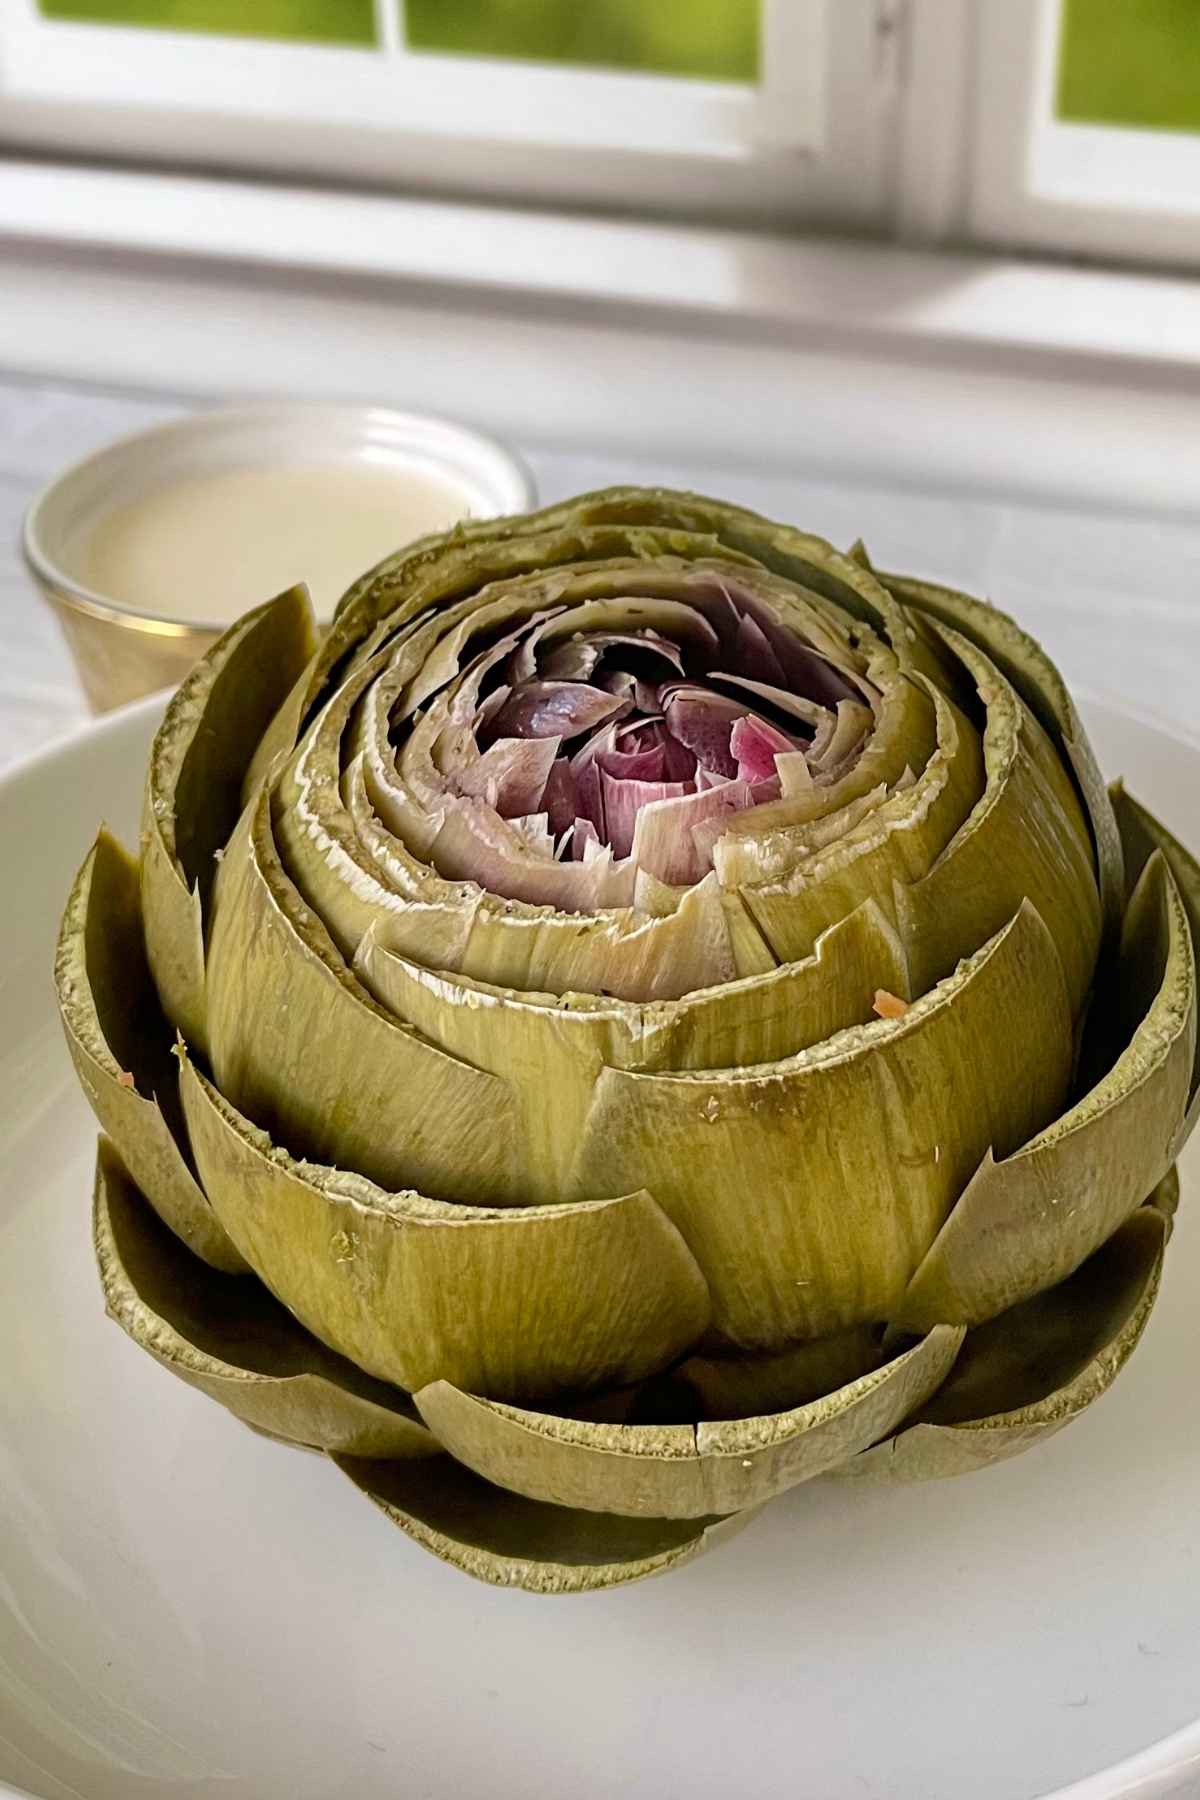 Steamed Artichokes on a plate with a side of lemon garlic aioli.